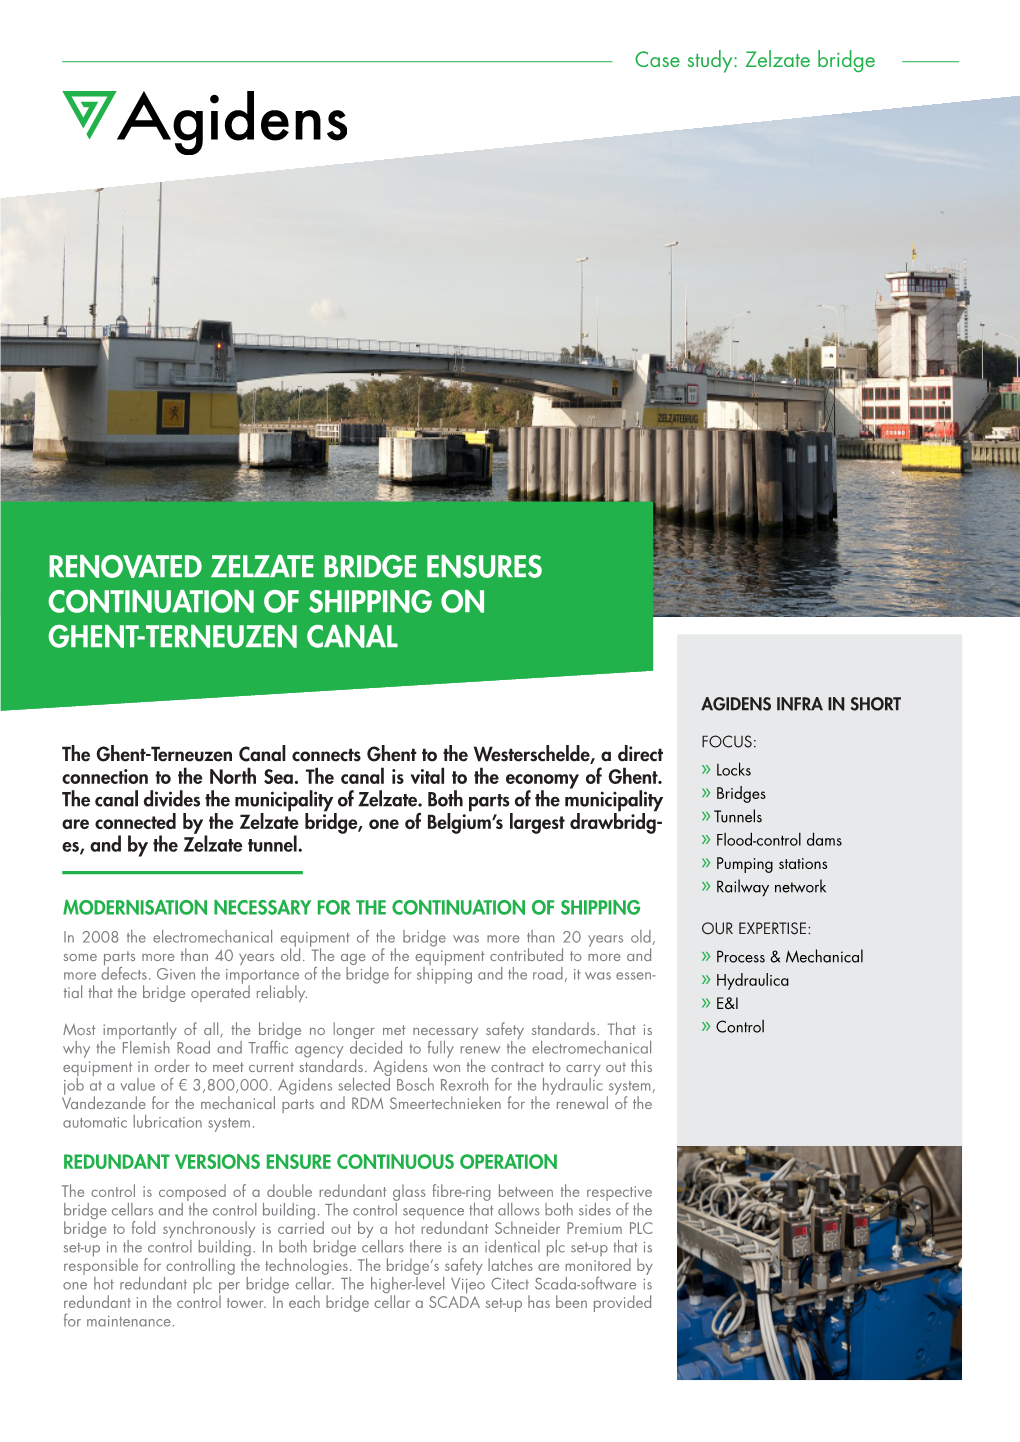 Renovated Zelzate Bridge Ensures Continuation of Shipping on Ghent-Terneuzen Canal